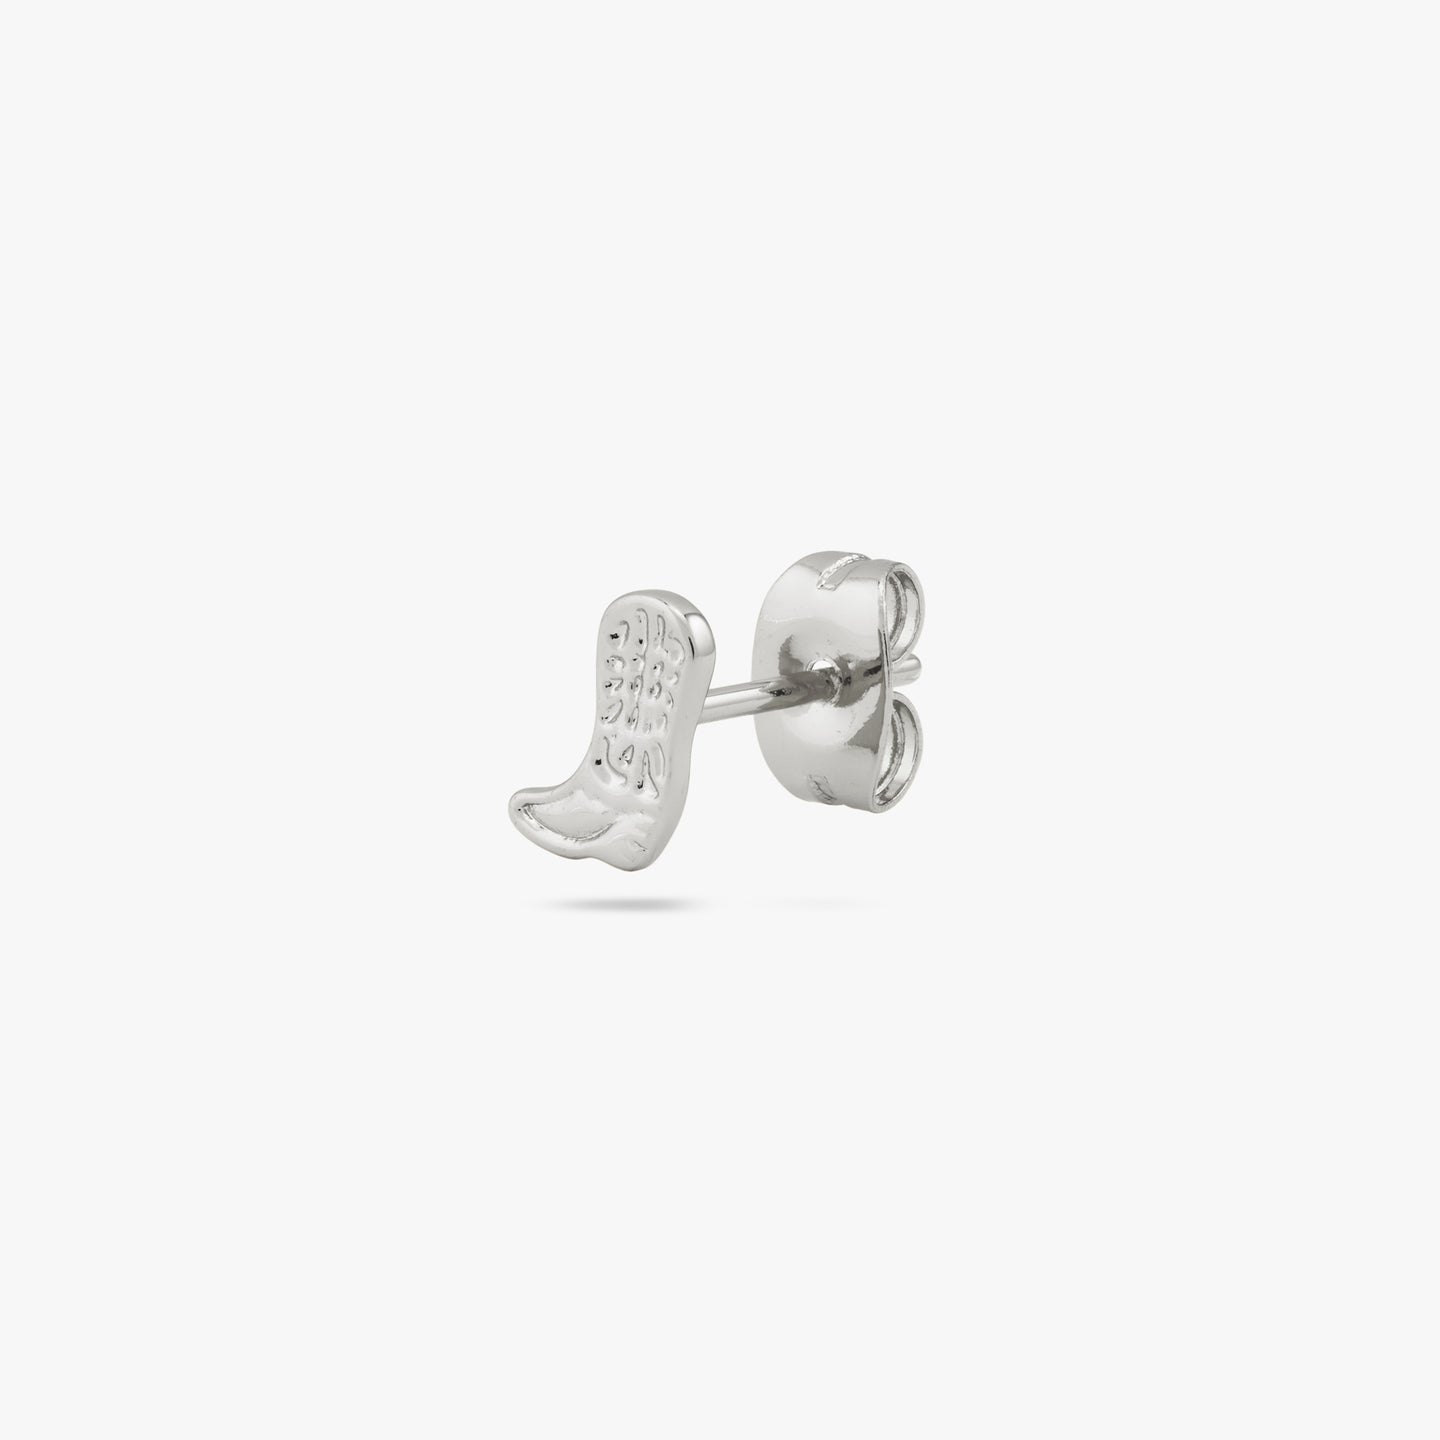 This is a small silver cowboy boot shaped stud with detailing color:null|silver